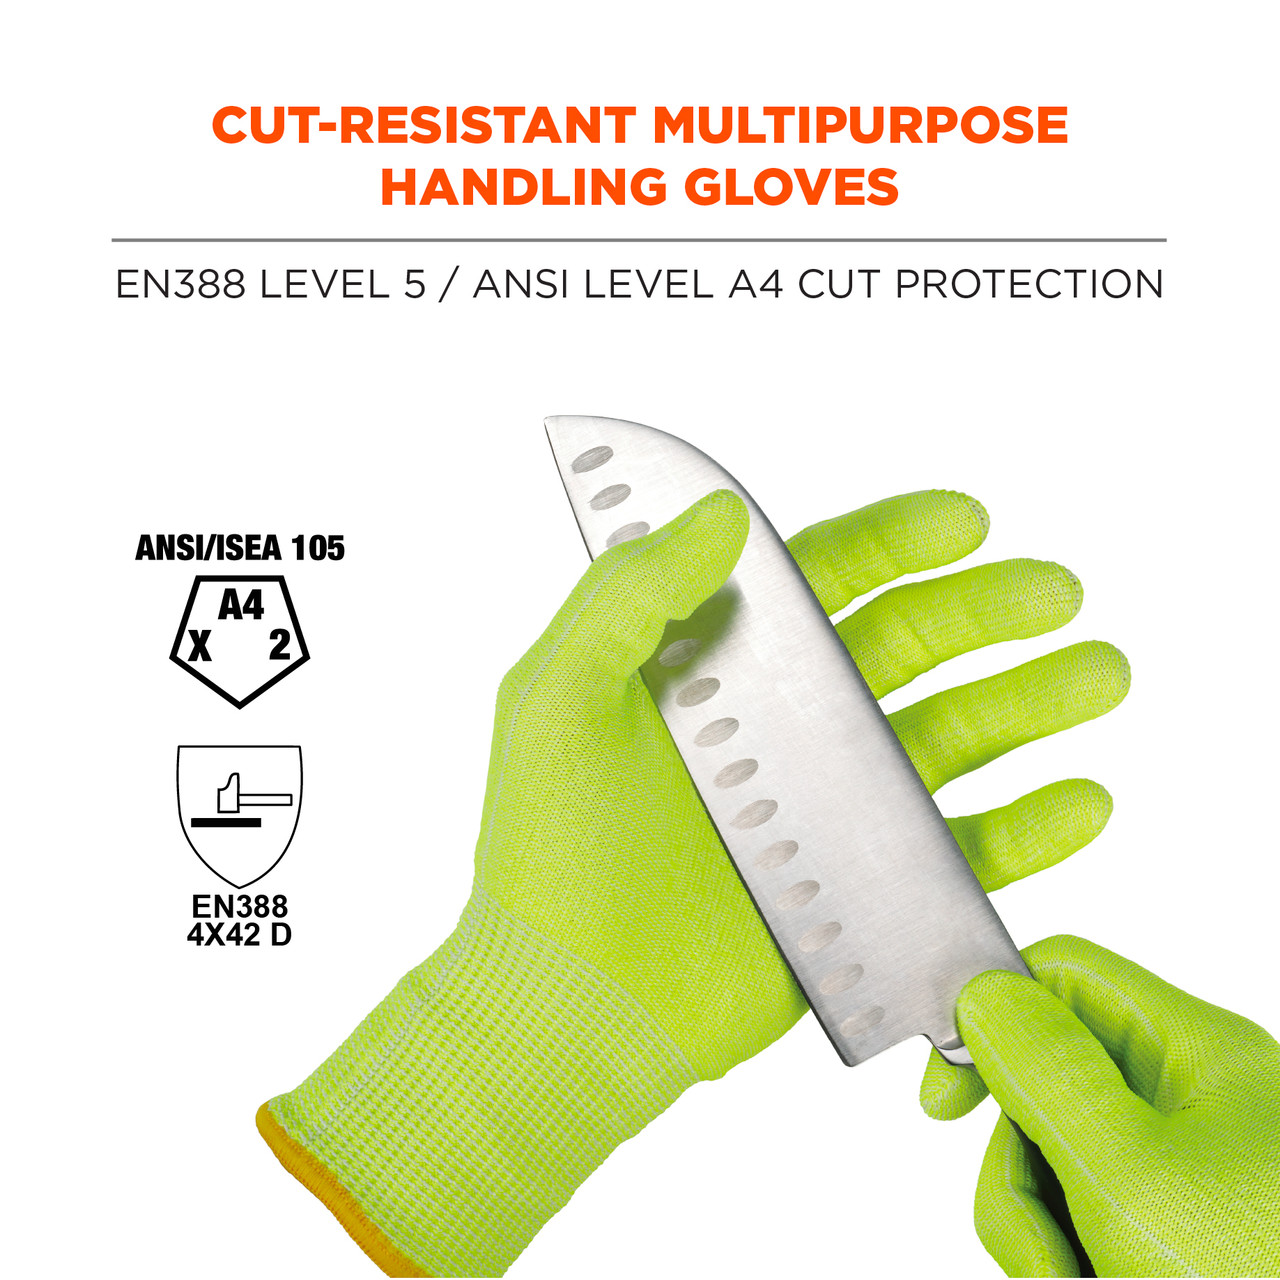 https://cdn11.bigcommerce.com/s-8715e/images/stencil/1280x1280/products/362864/684390/18022-7040-case-cut-resistant-food-grade-gloves-lime-cut-resistant-multipurpose-handling-gloves_0__69788.1702331798.jpg?c=2?imbypass=on